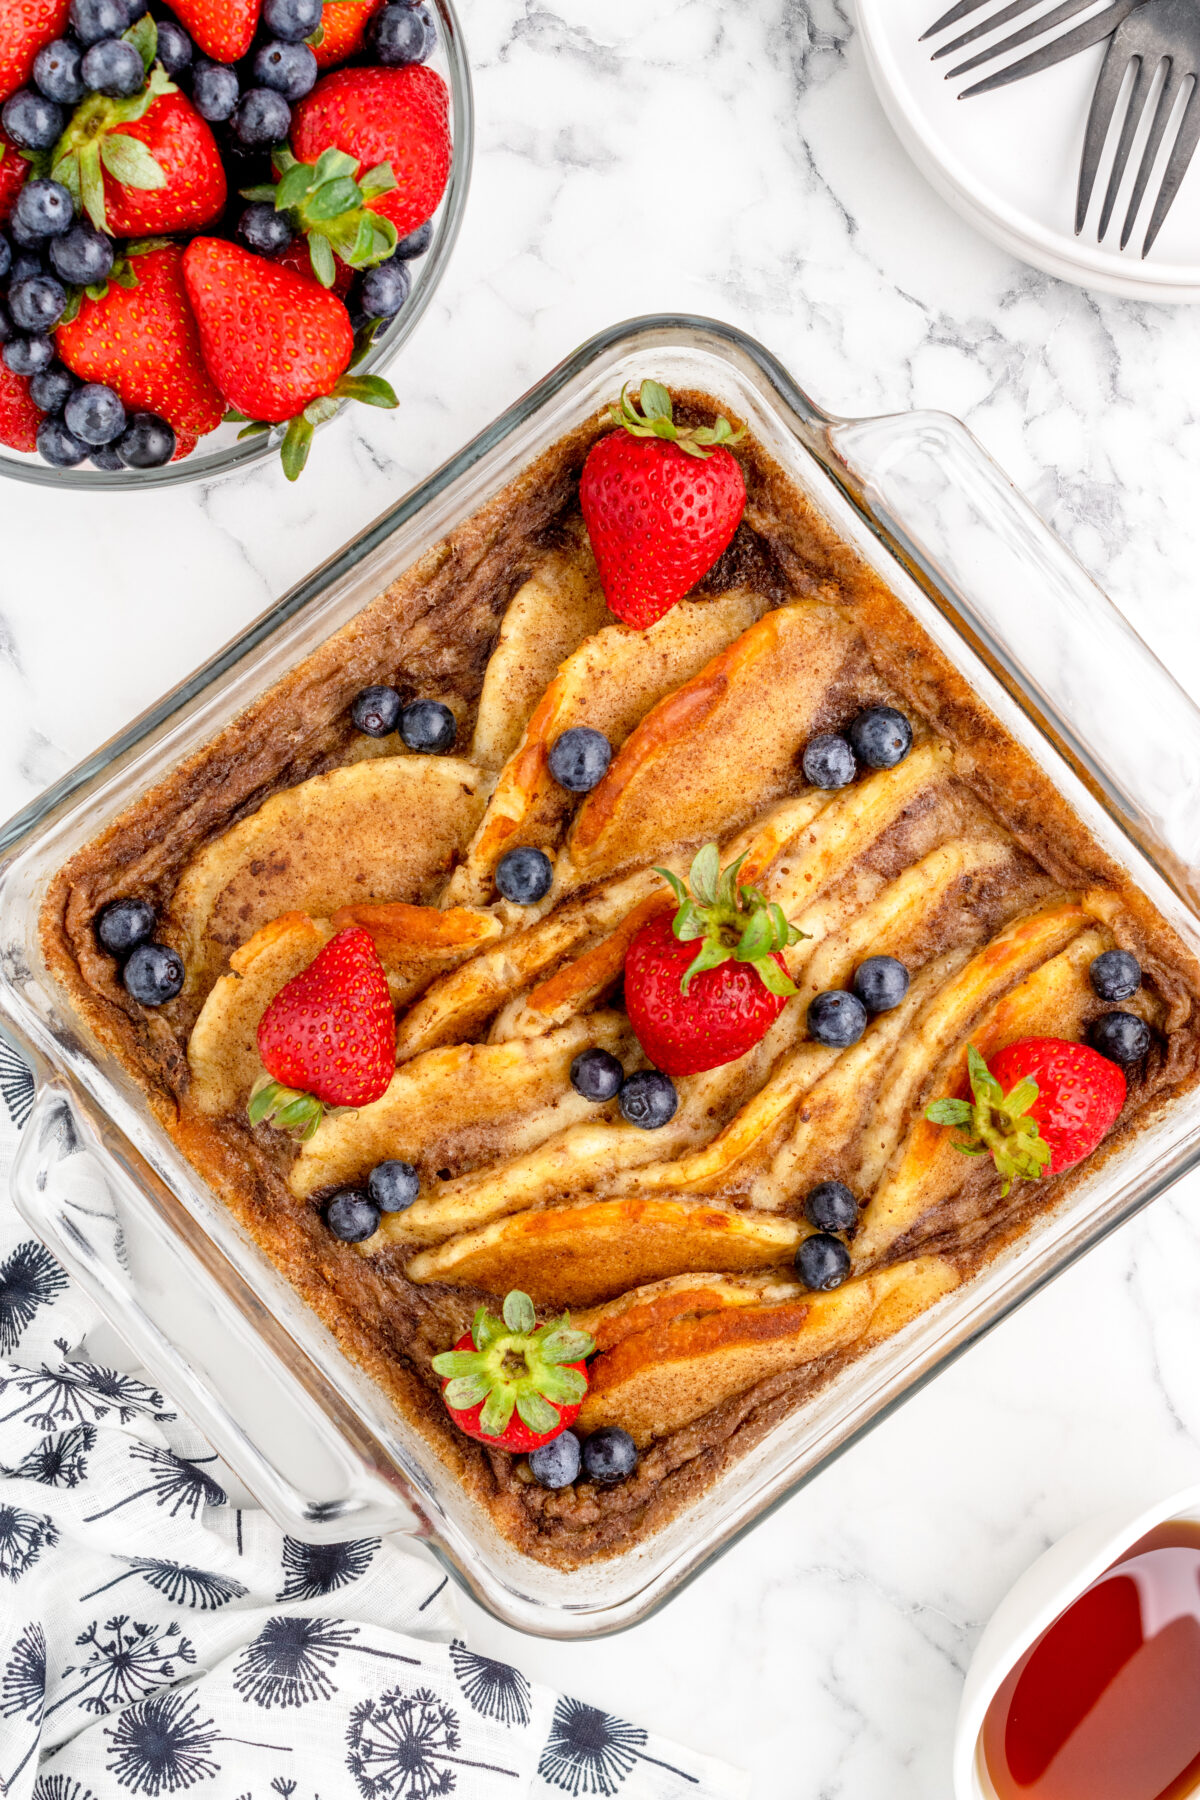 Try out our irresistible pancake casserole recipe and start your morning off right! Perfect for lazy weekends and special occasion brunches!